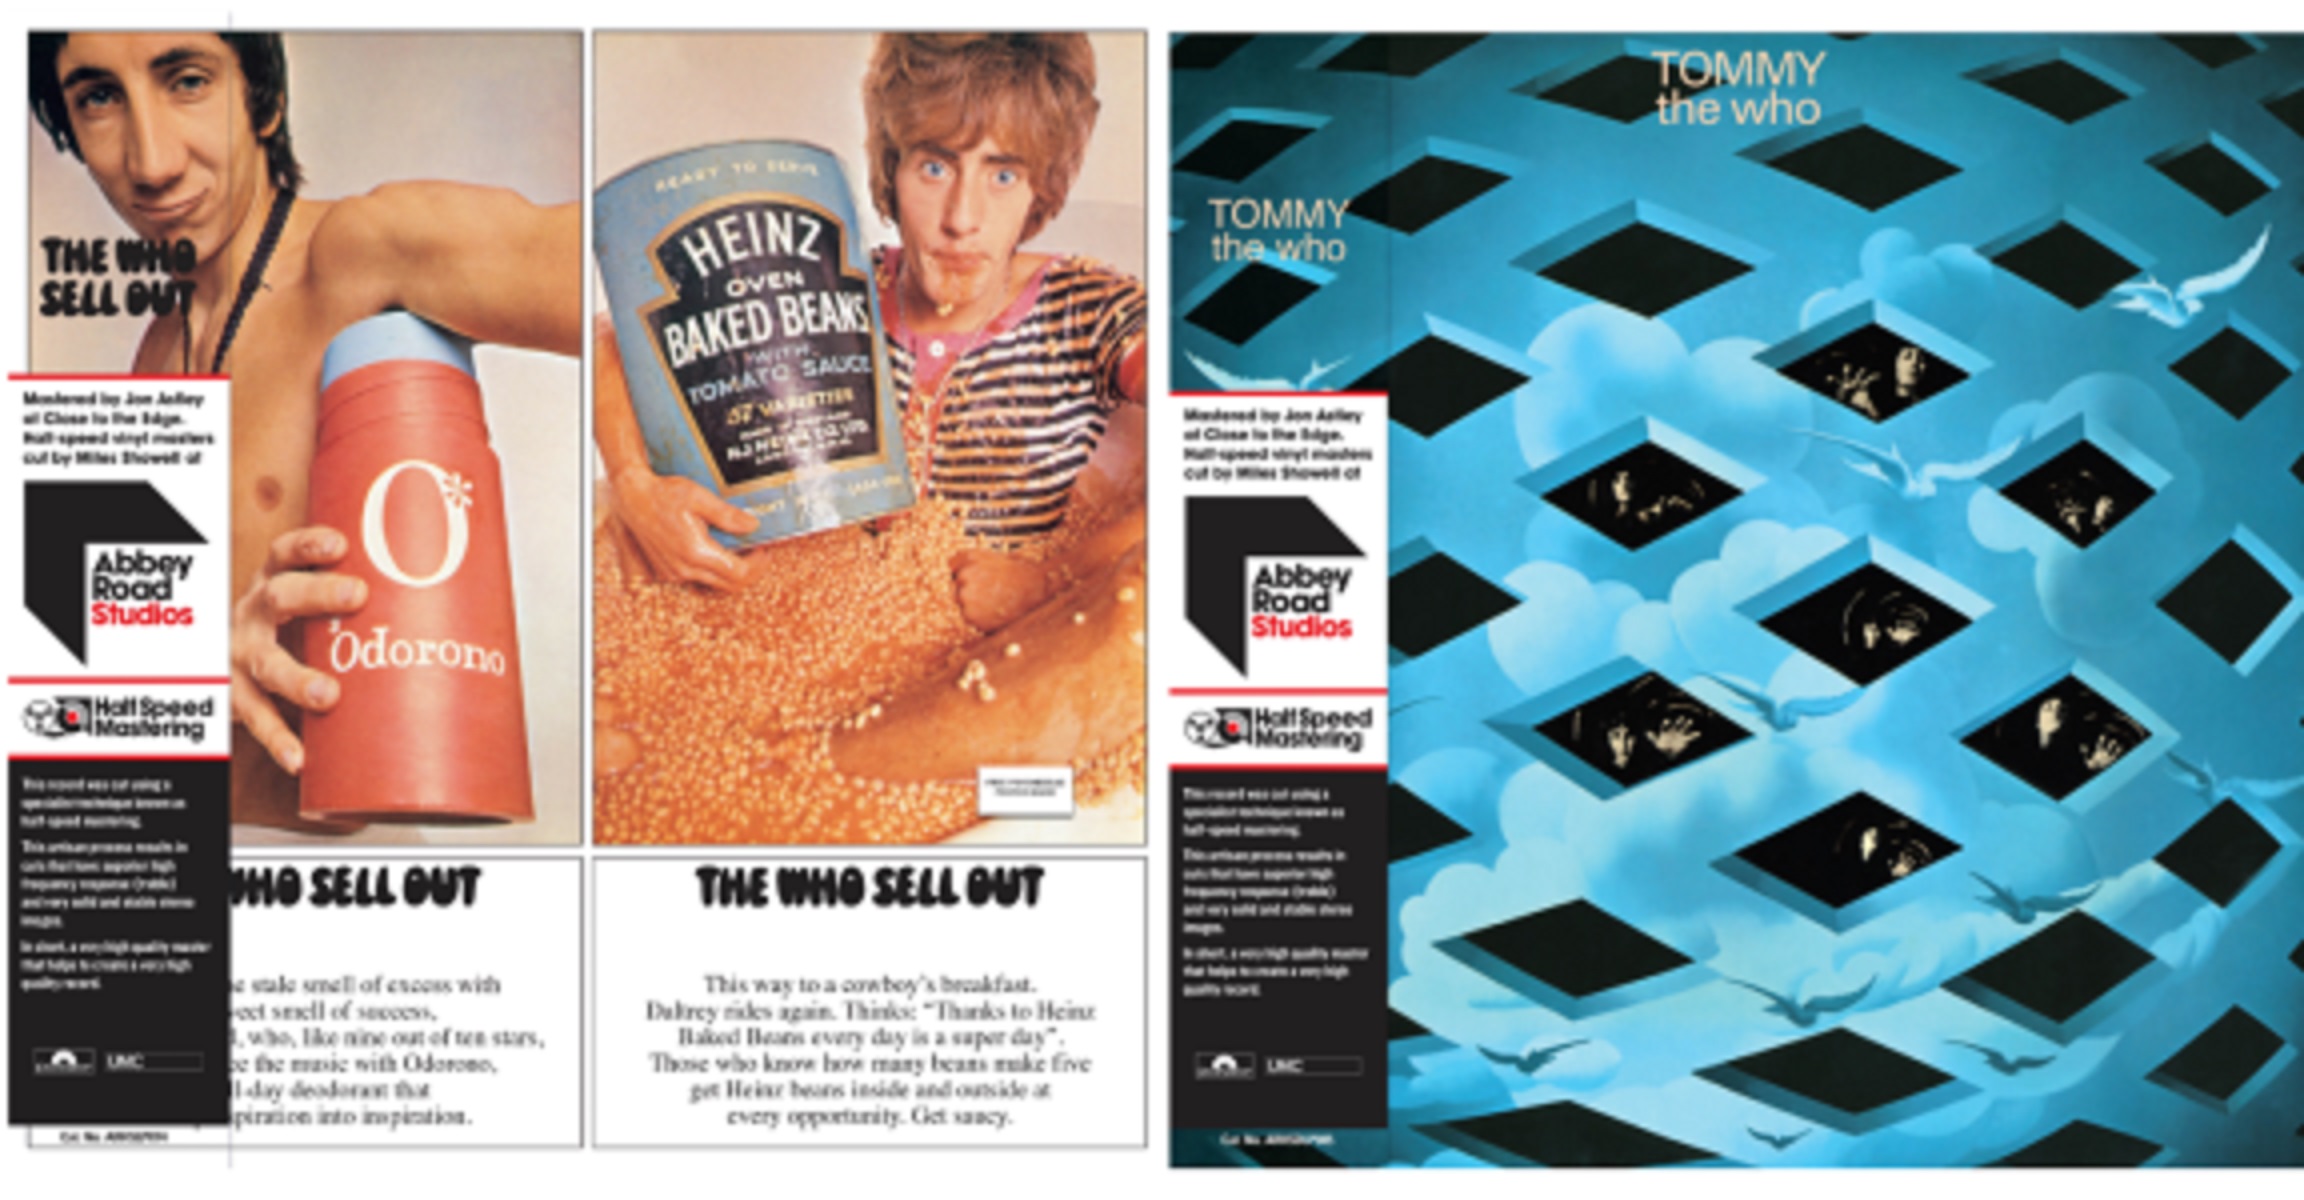 The Who - The Second In A Series Of New Limited Edition Half Speed Mastered Albums 'The Who Sell Out' & 'Tommy' Released July 6